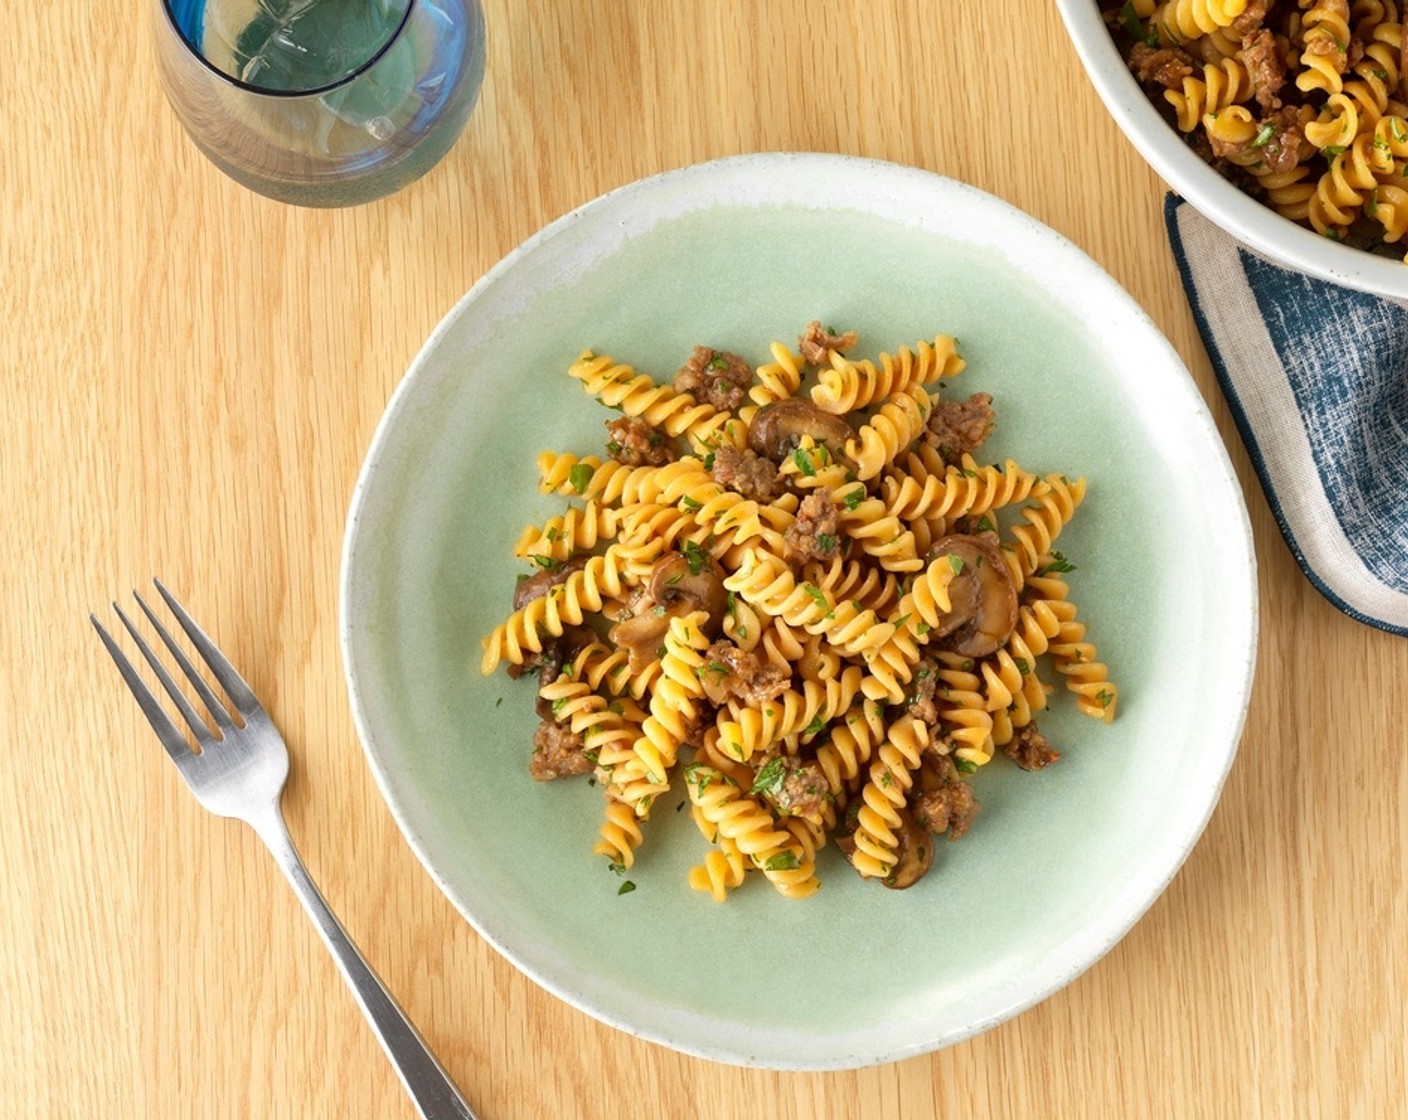 Chickpea Rotini with Spicy Italian Sausage and Mushroom Ragout